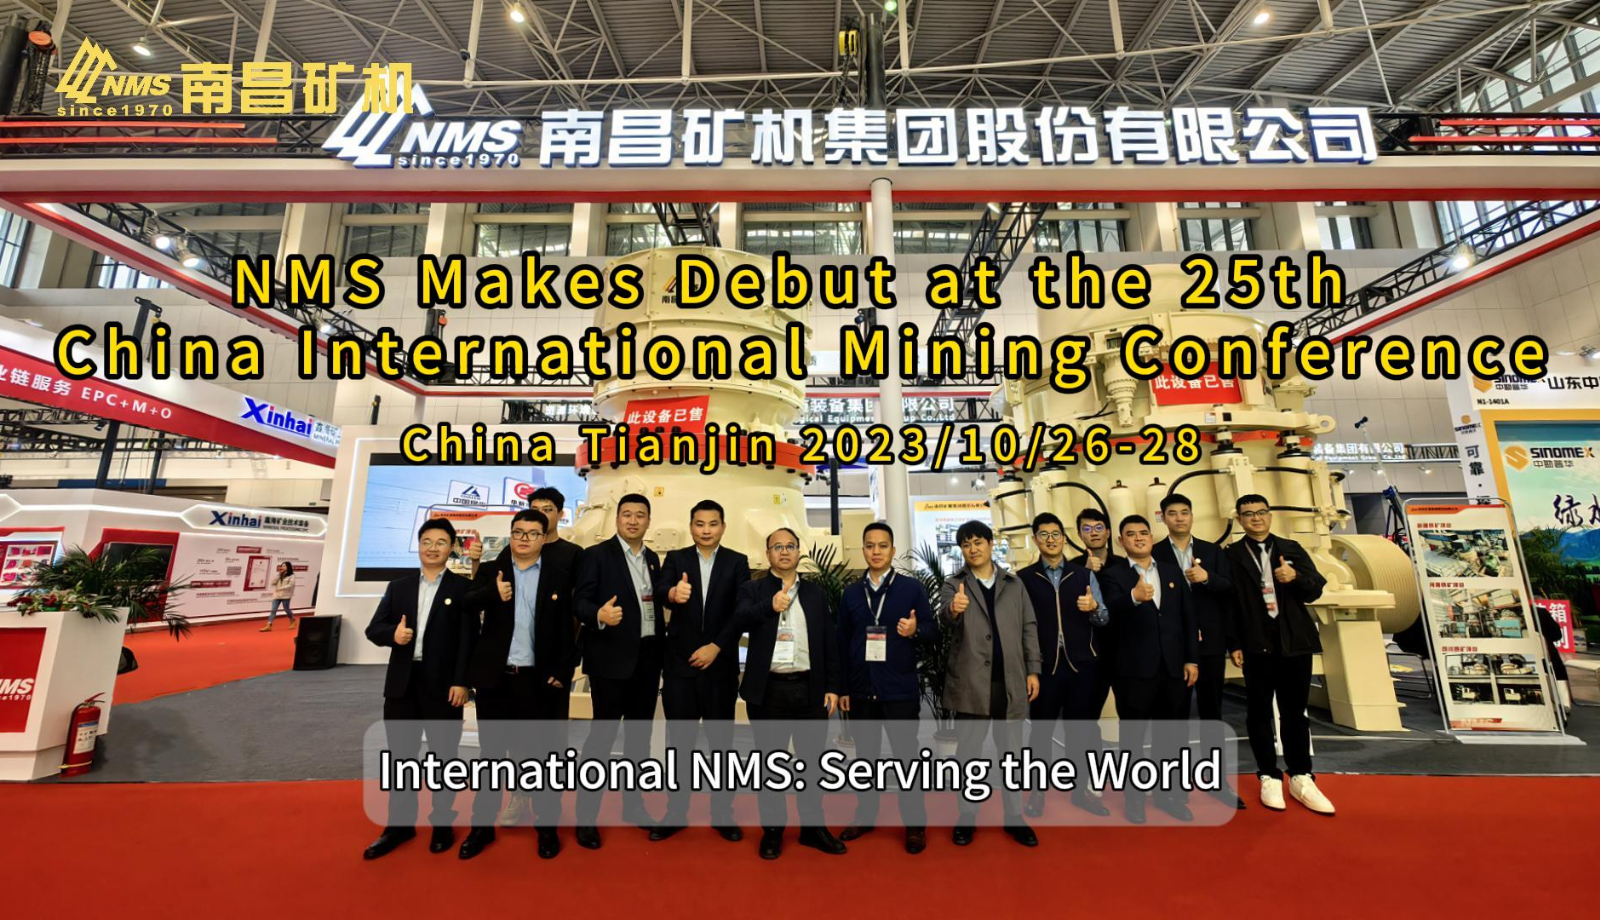 NMS Makes Debut at the 25th China International Mining Conference